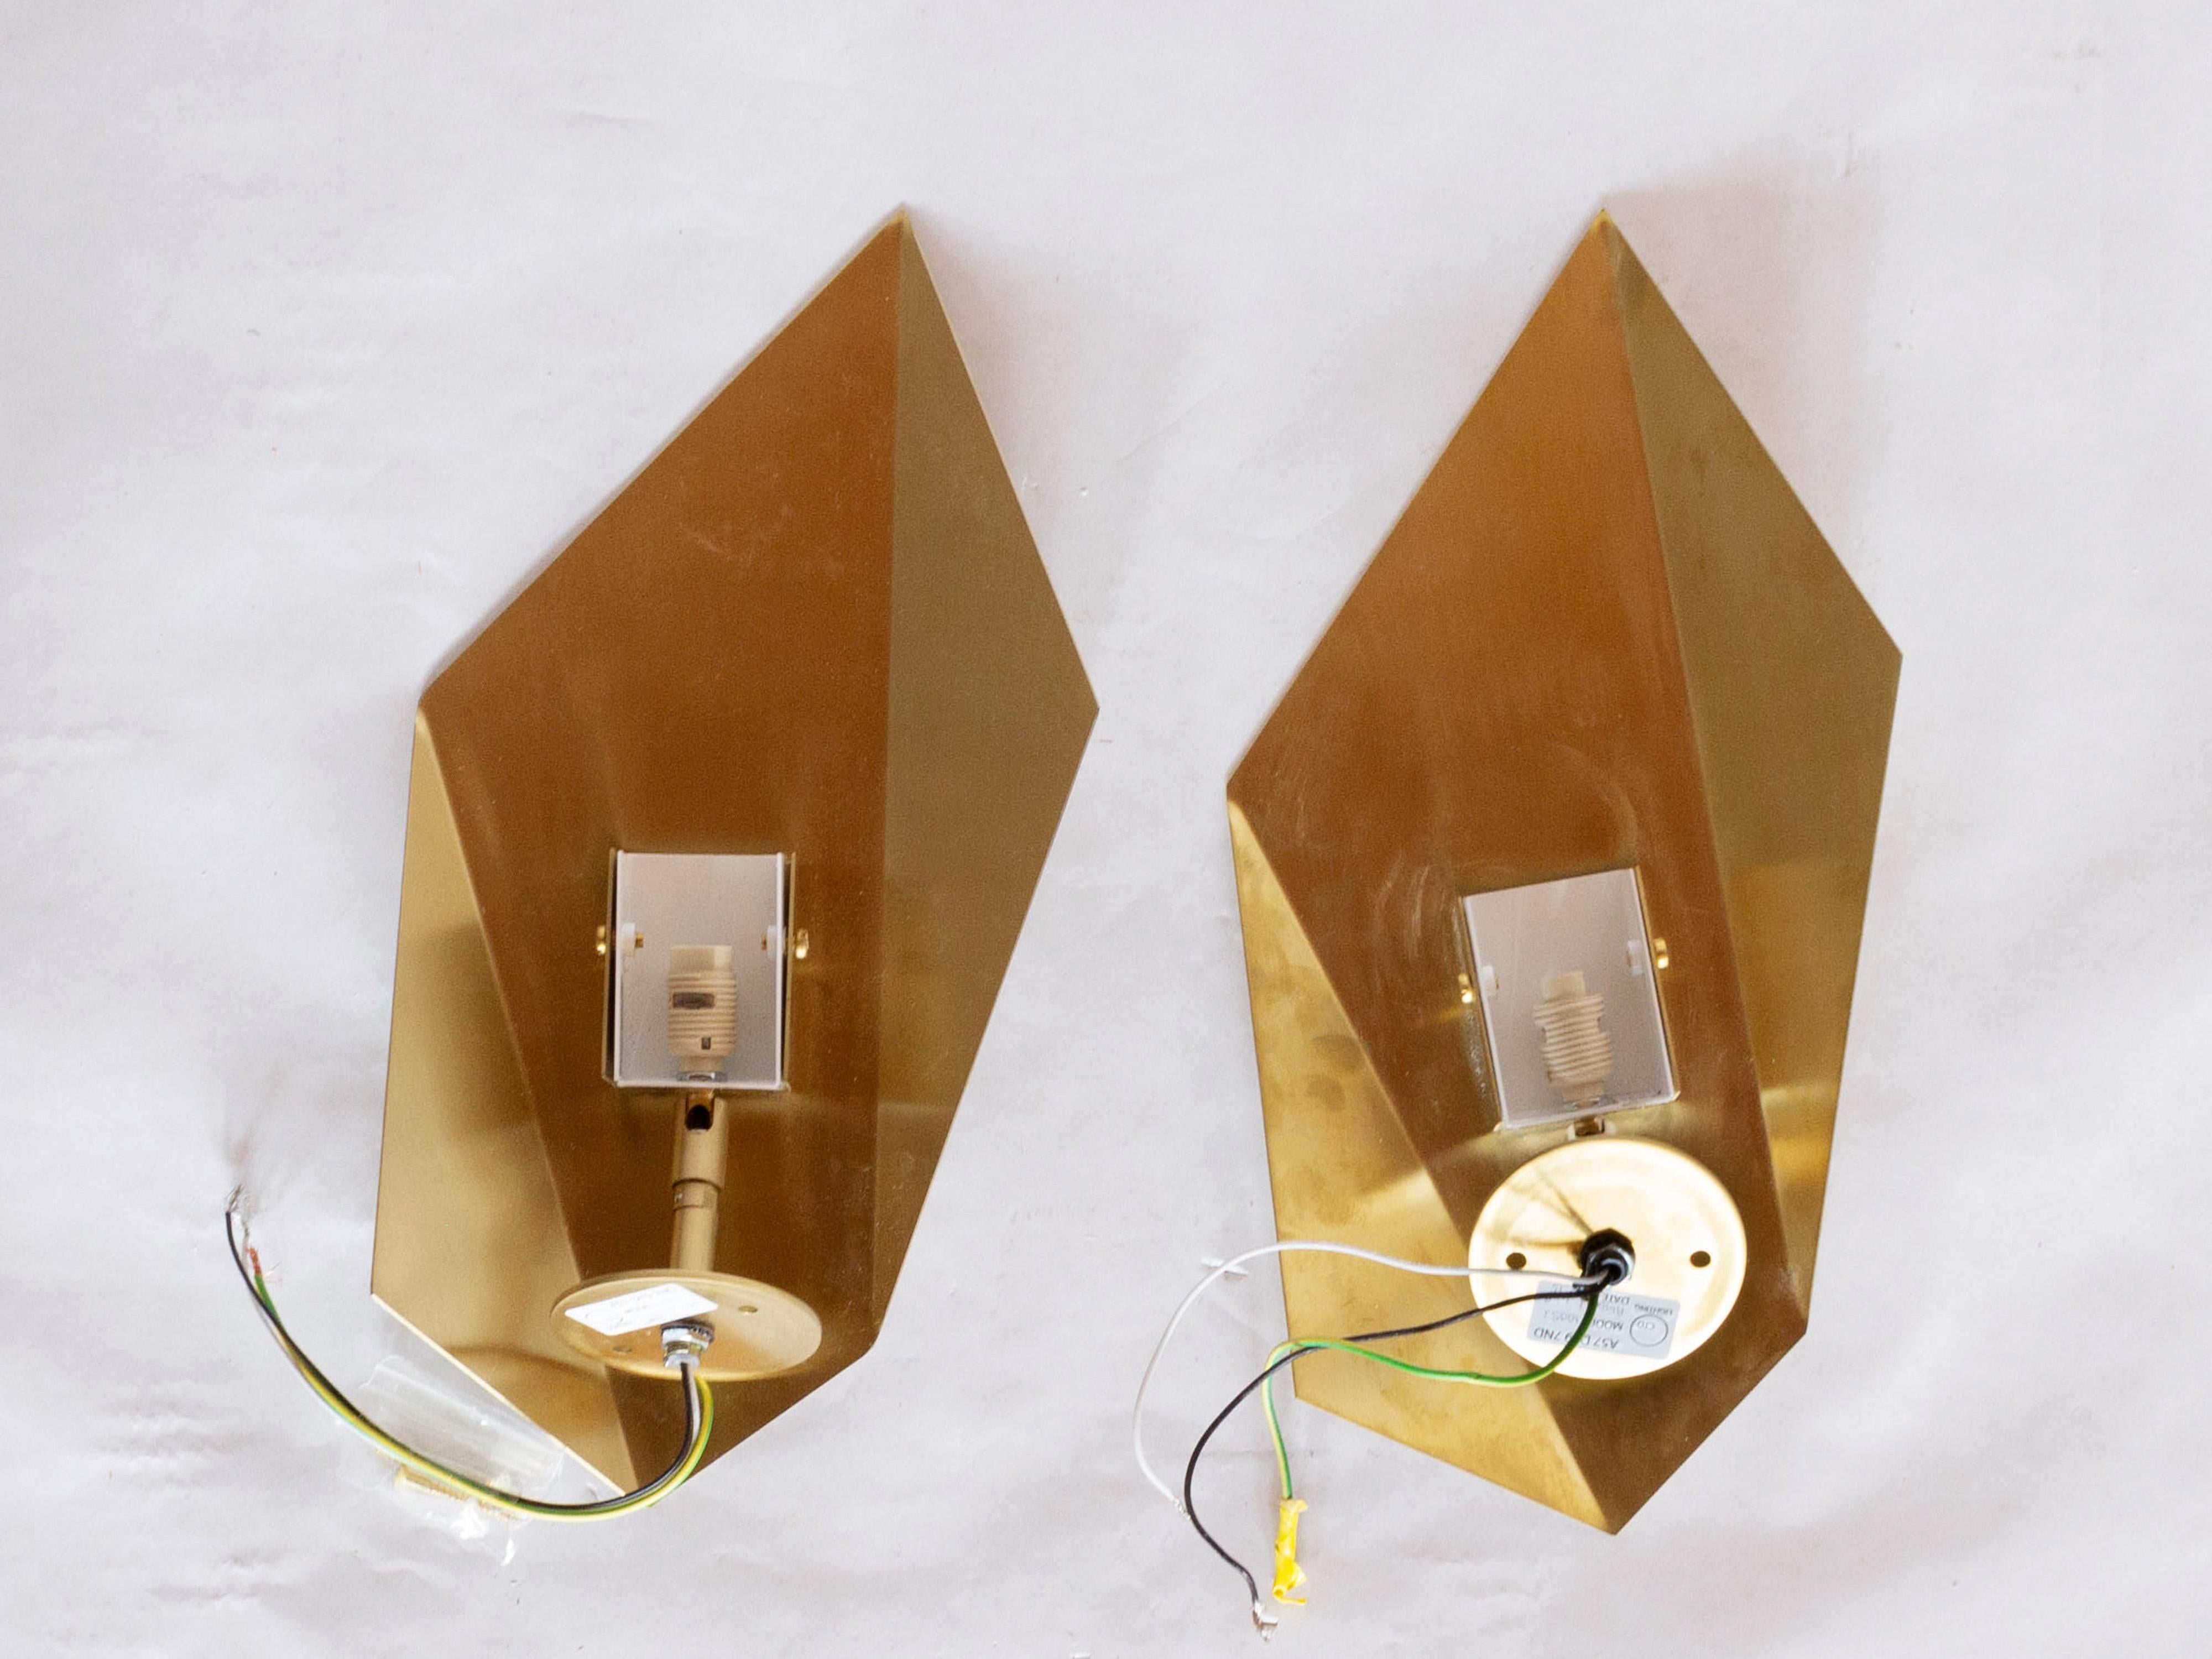 Pair of abstract folded sconces, shaped as a leaf with two simple folds. Looks great in a group, and the shade can be rotated to play with the shape. Hand-finished.

Recommended wattage: 2.5W LED 2700K or halogen 25W max.